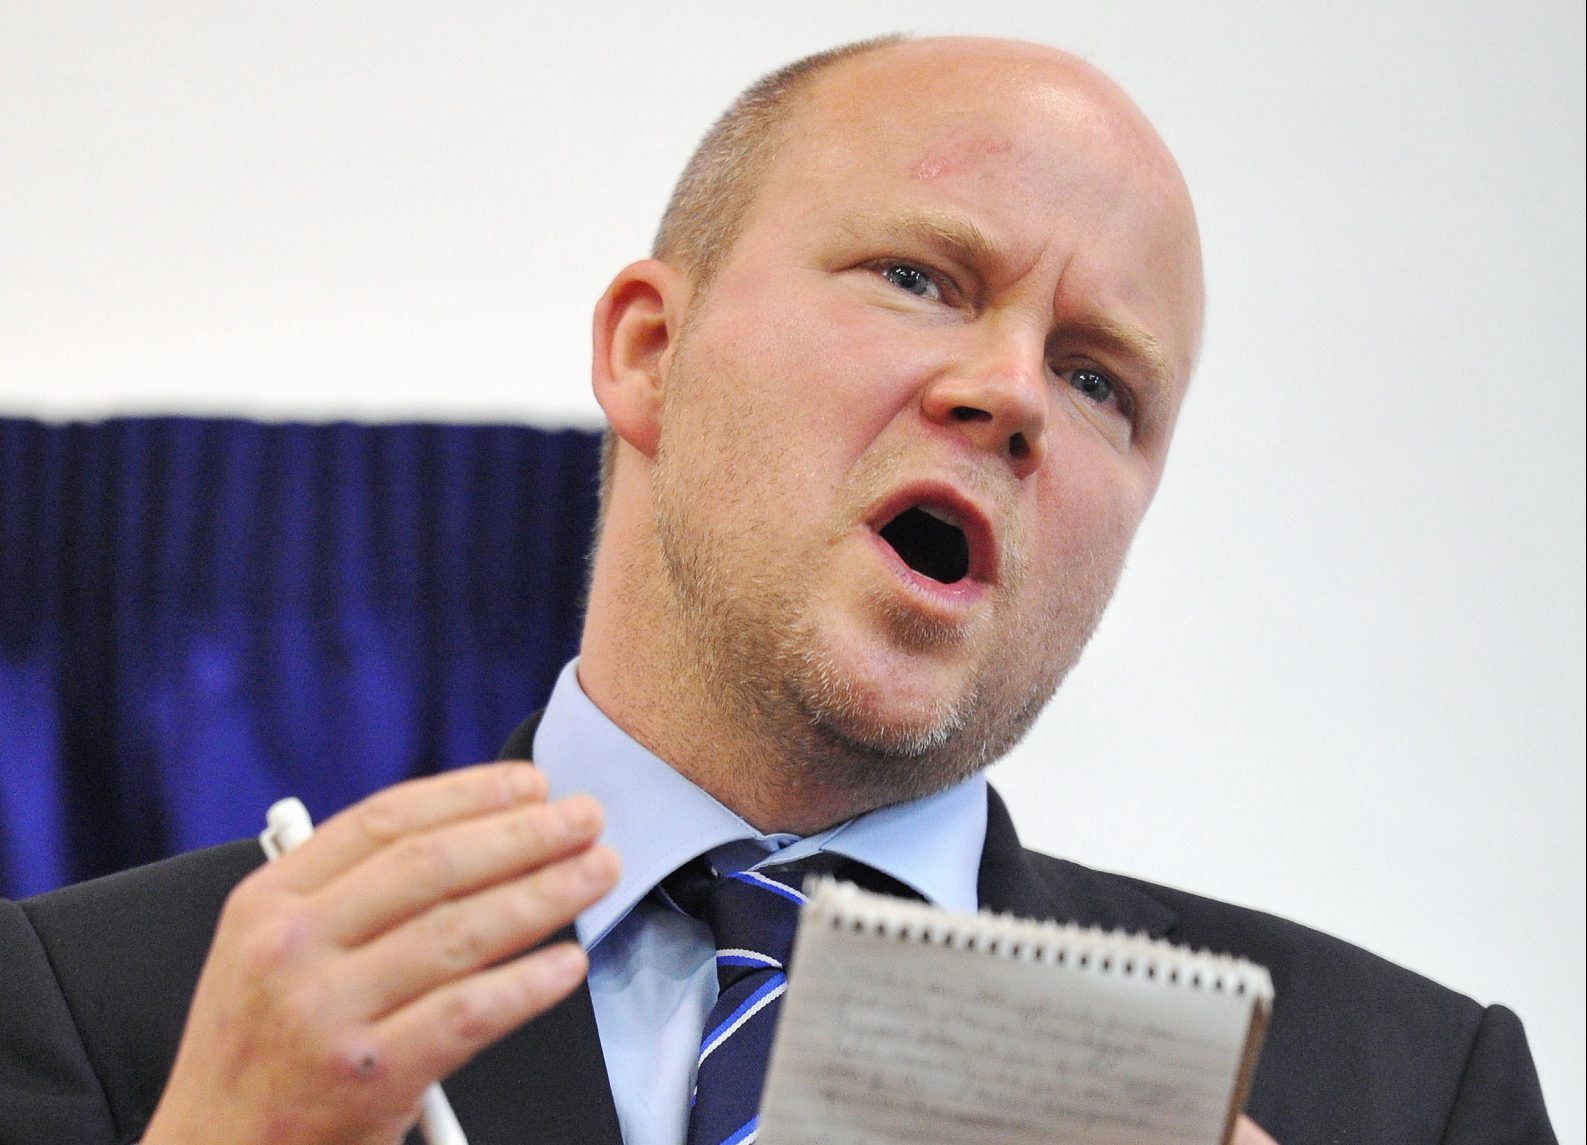 Toby Young ridiculed for coronavirus maths “brain fart”